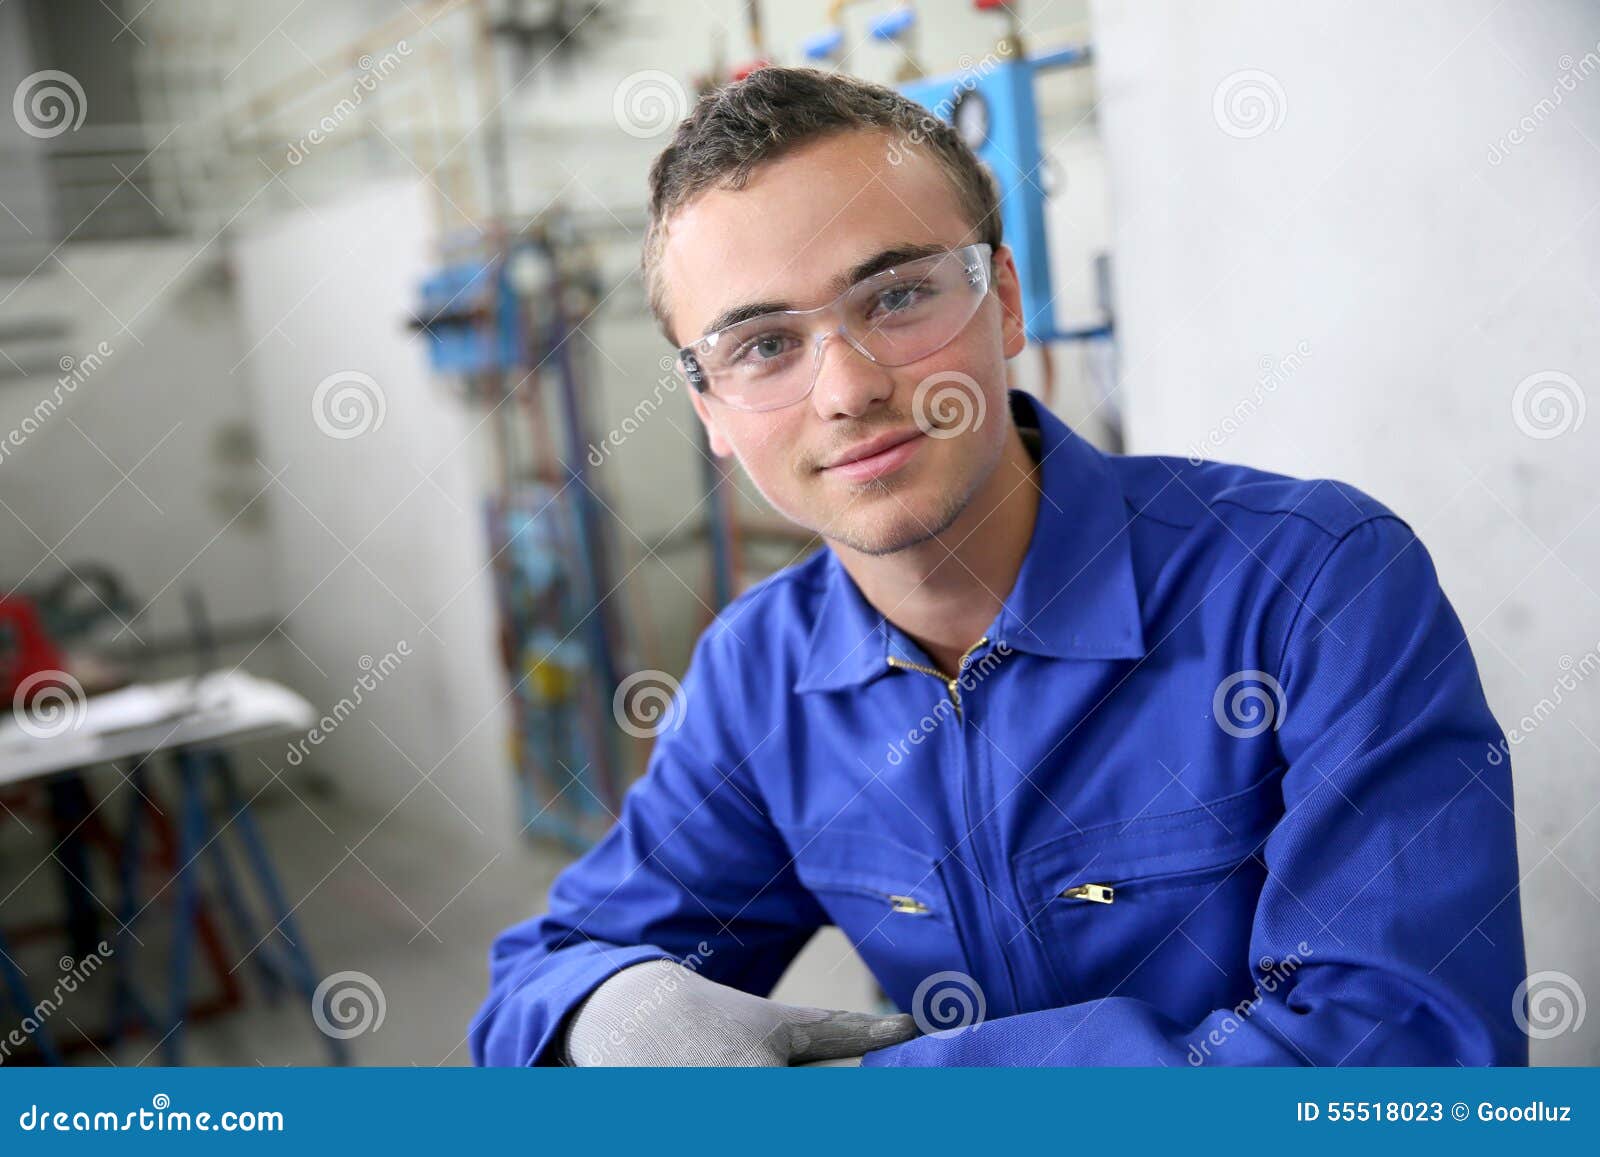 portrait of smiling young trainee in plumbery